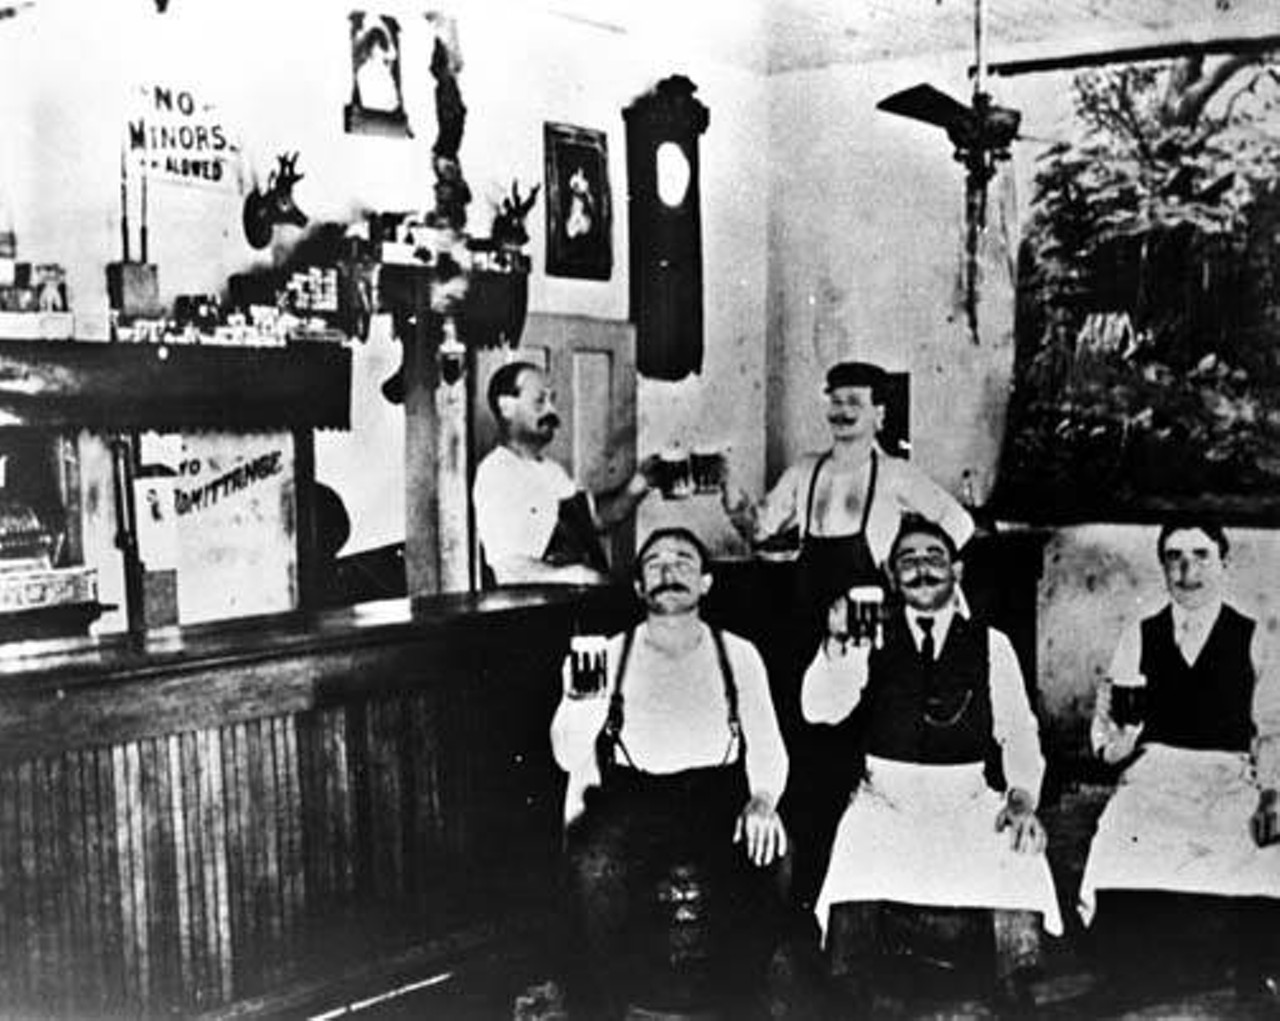 Peter Brothers Brewery and Saloon, San AntonioThis 1895 photo from the San Antonio-Express News’ collection shows the Alsatian American owners John Peter (seated on left) and Gus Peter (at center) of this beer-lovers’ paradise along with three other unidentified men.